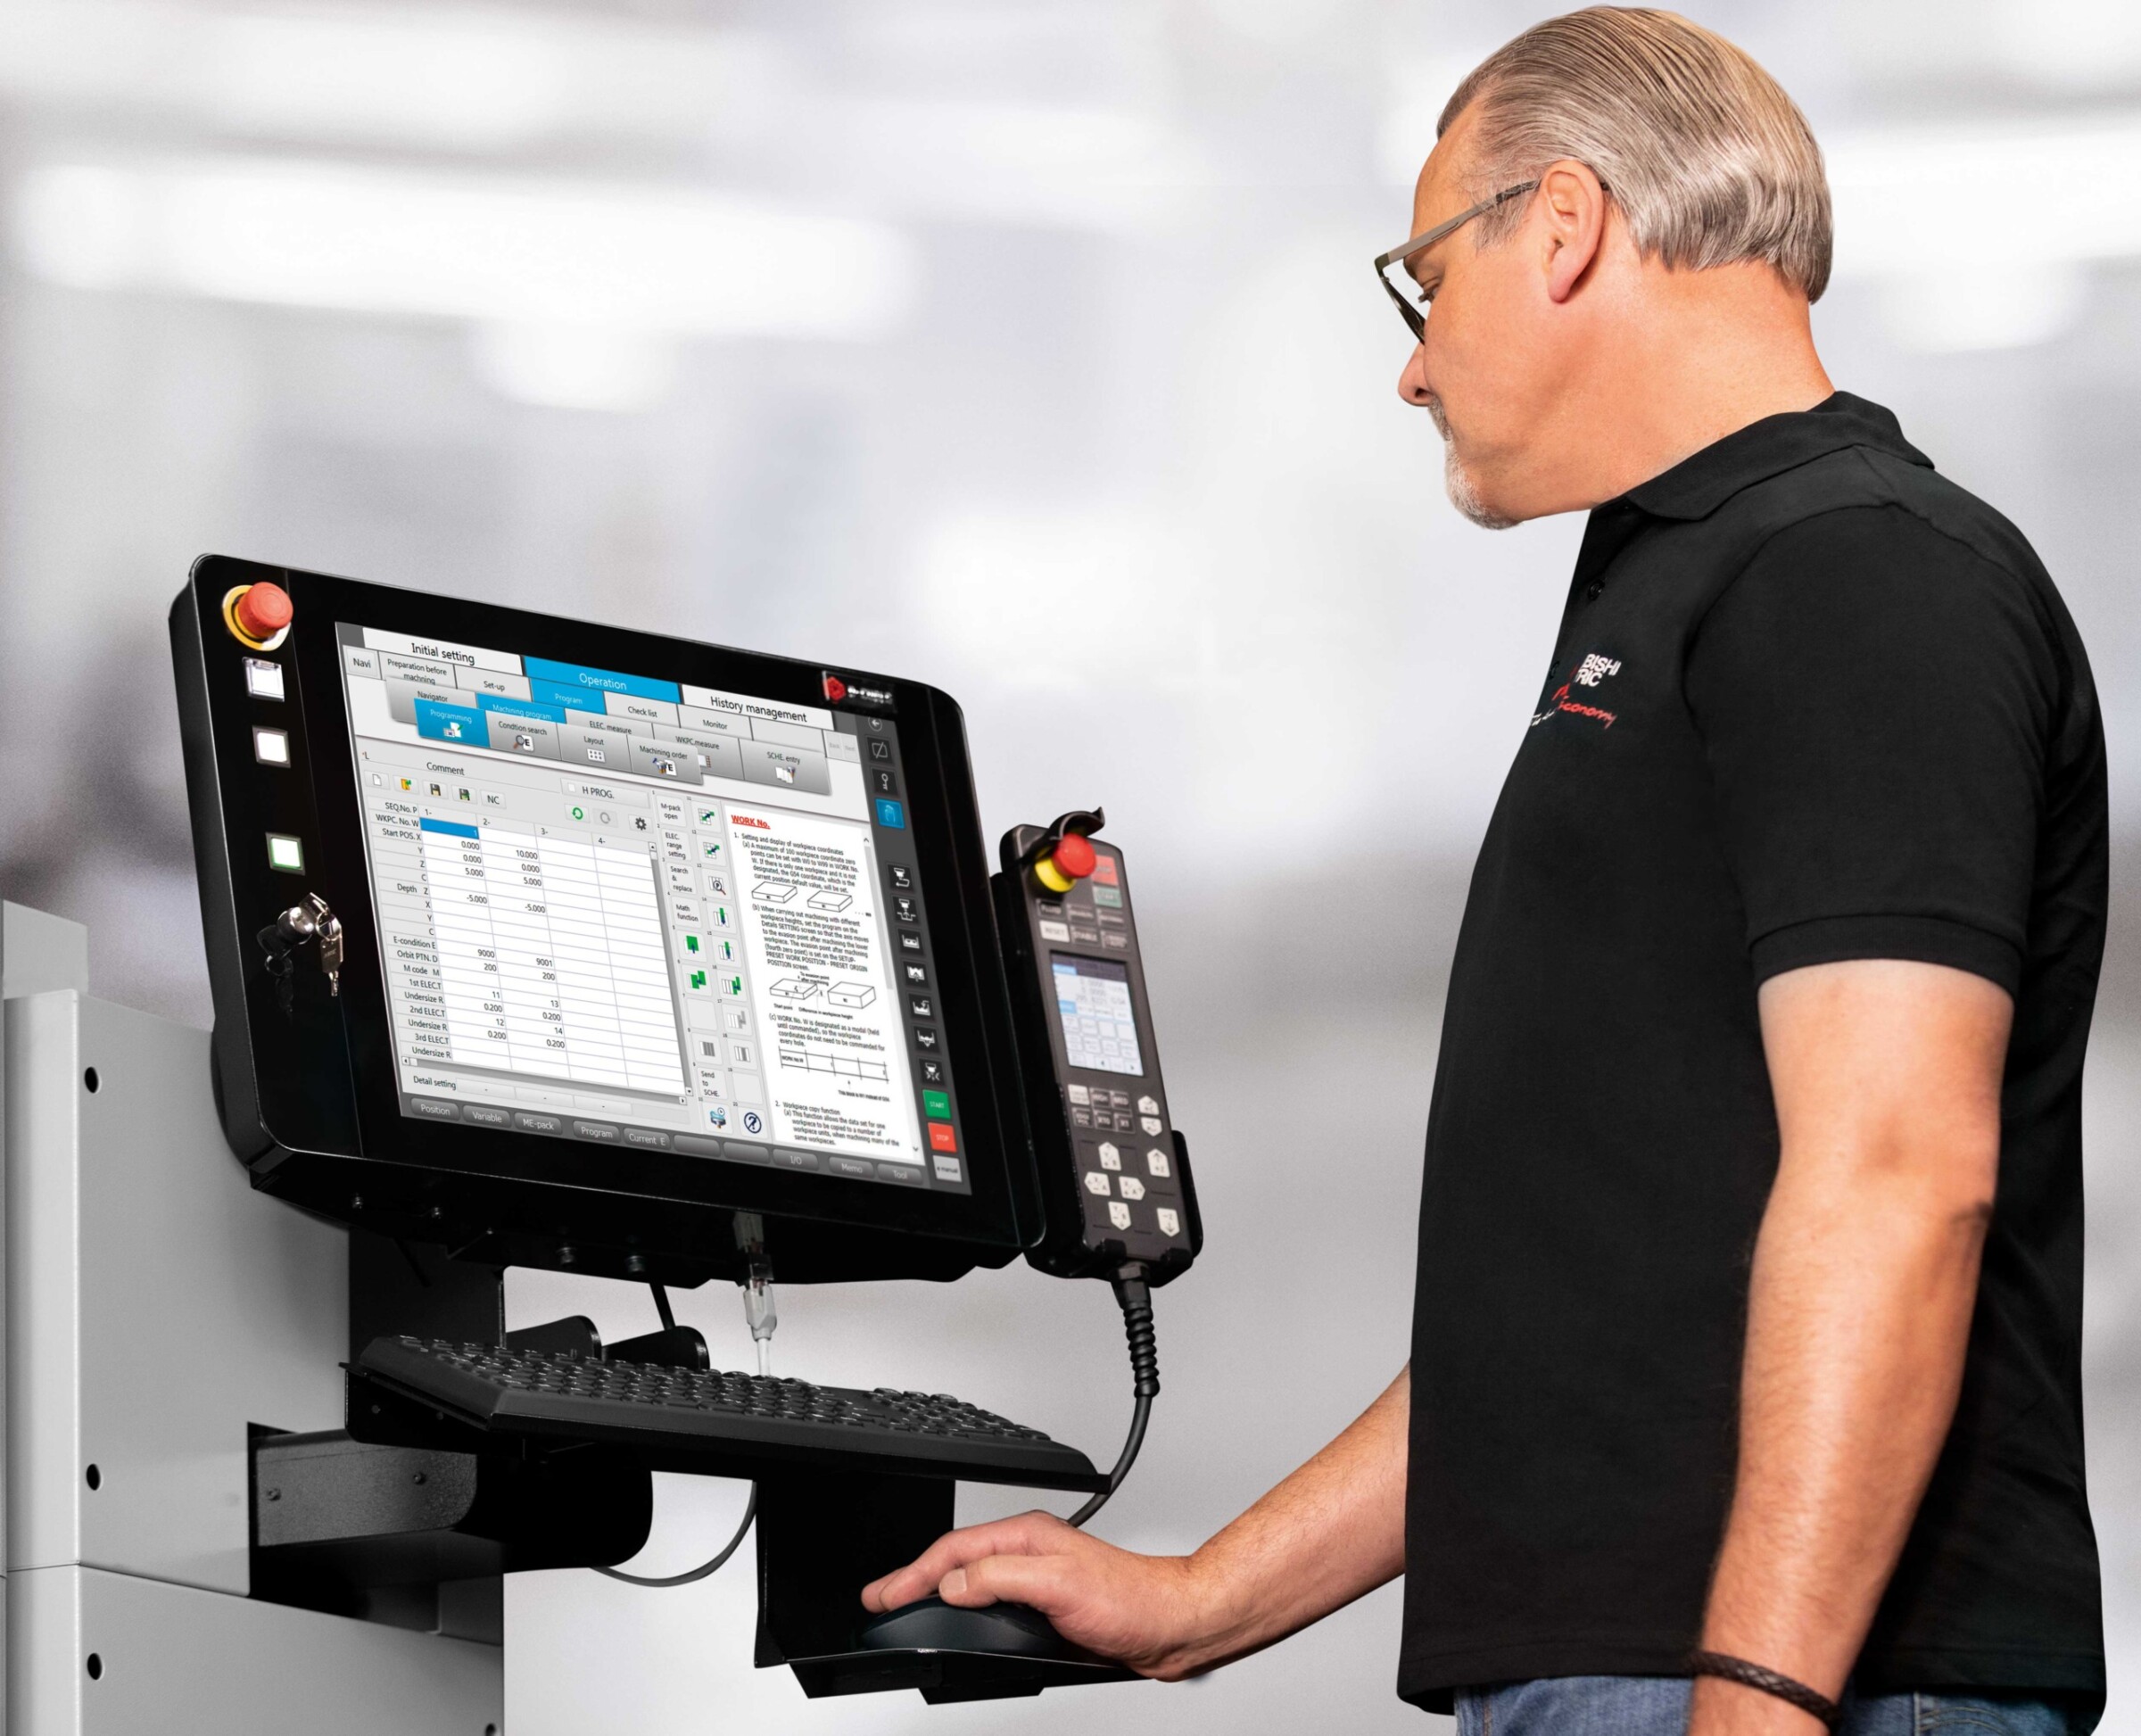 The advanced D-CUBES M800 control supports the operator in every situation. It handles ­routine tasks and takes the effort out of programming.